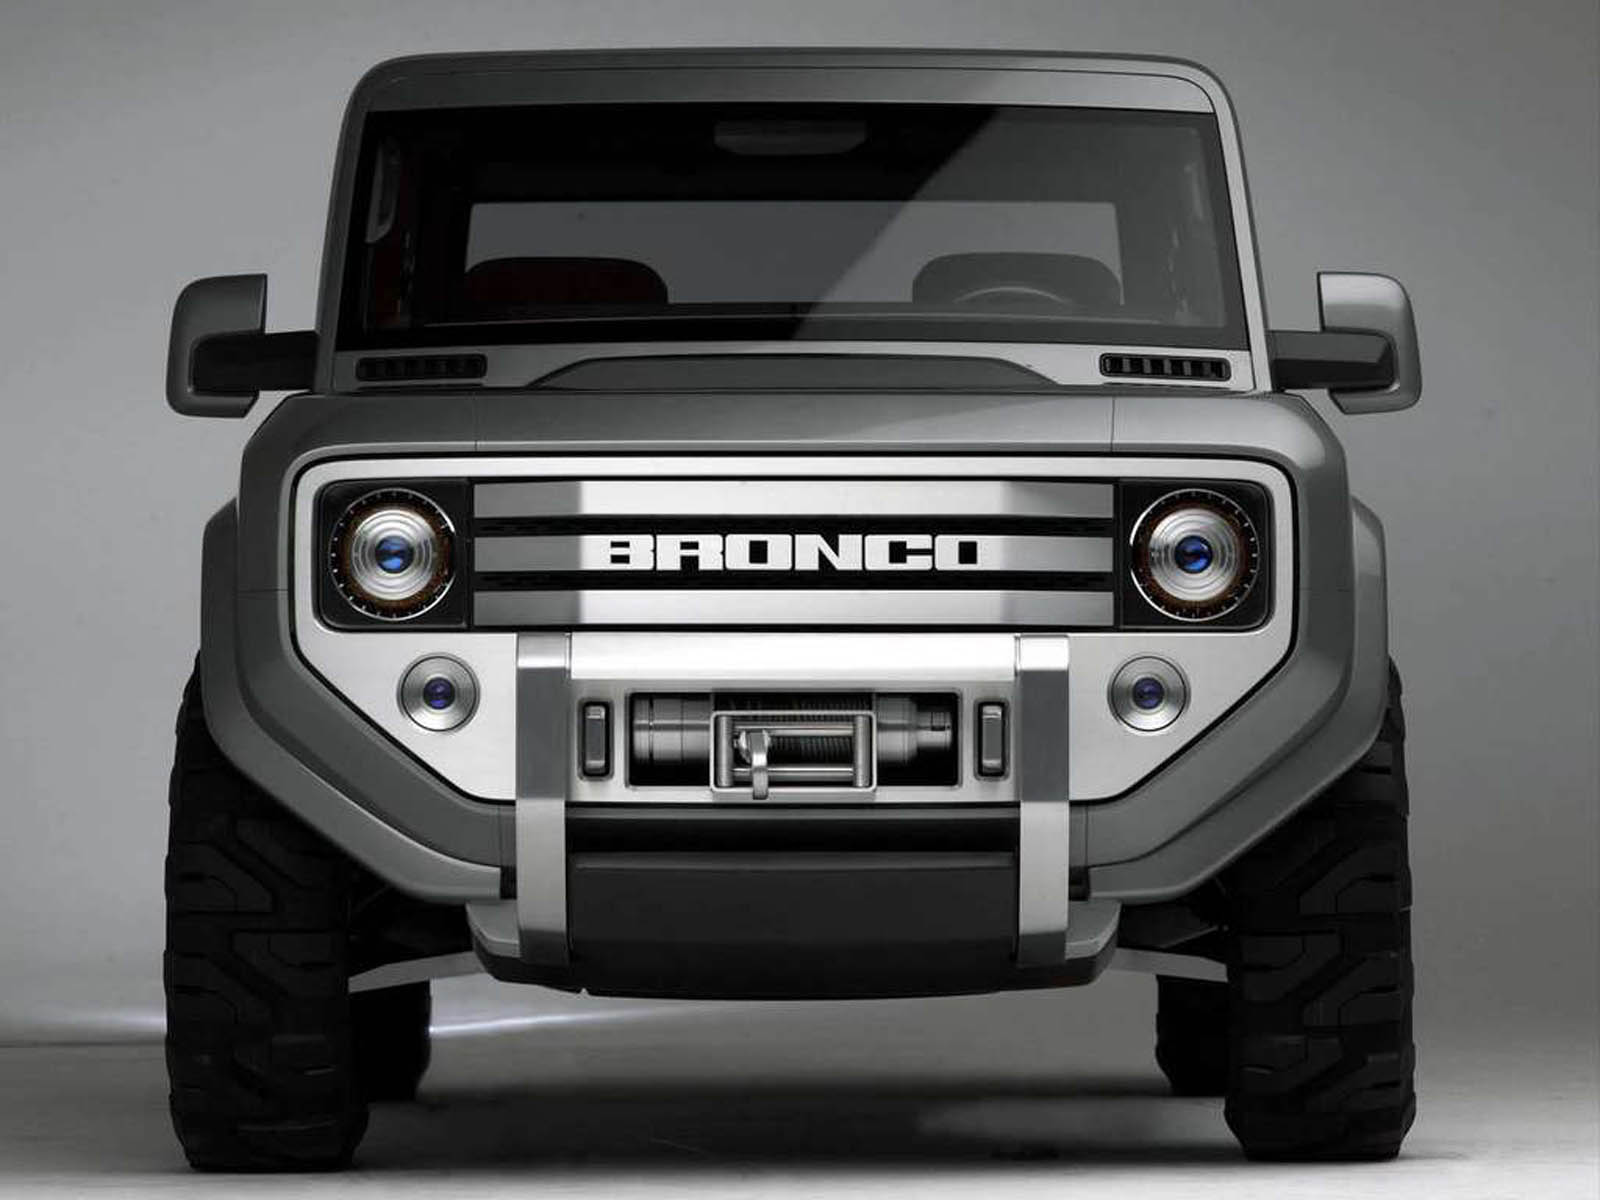 Tag: Ford Bronco Concept Car Wallpapers, Backgrounds, Photos, Images 